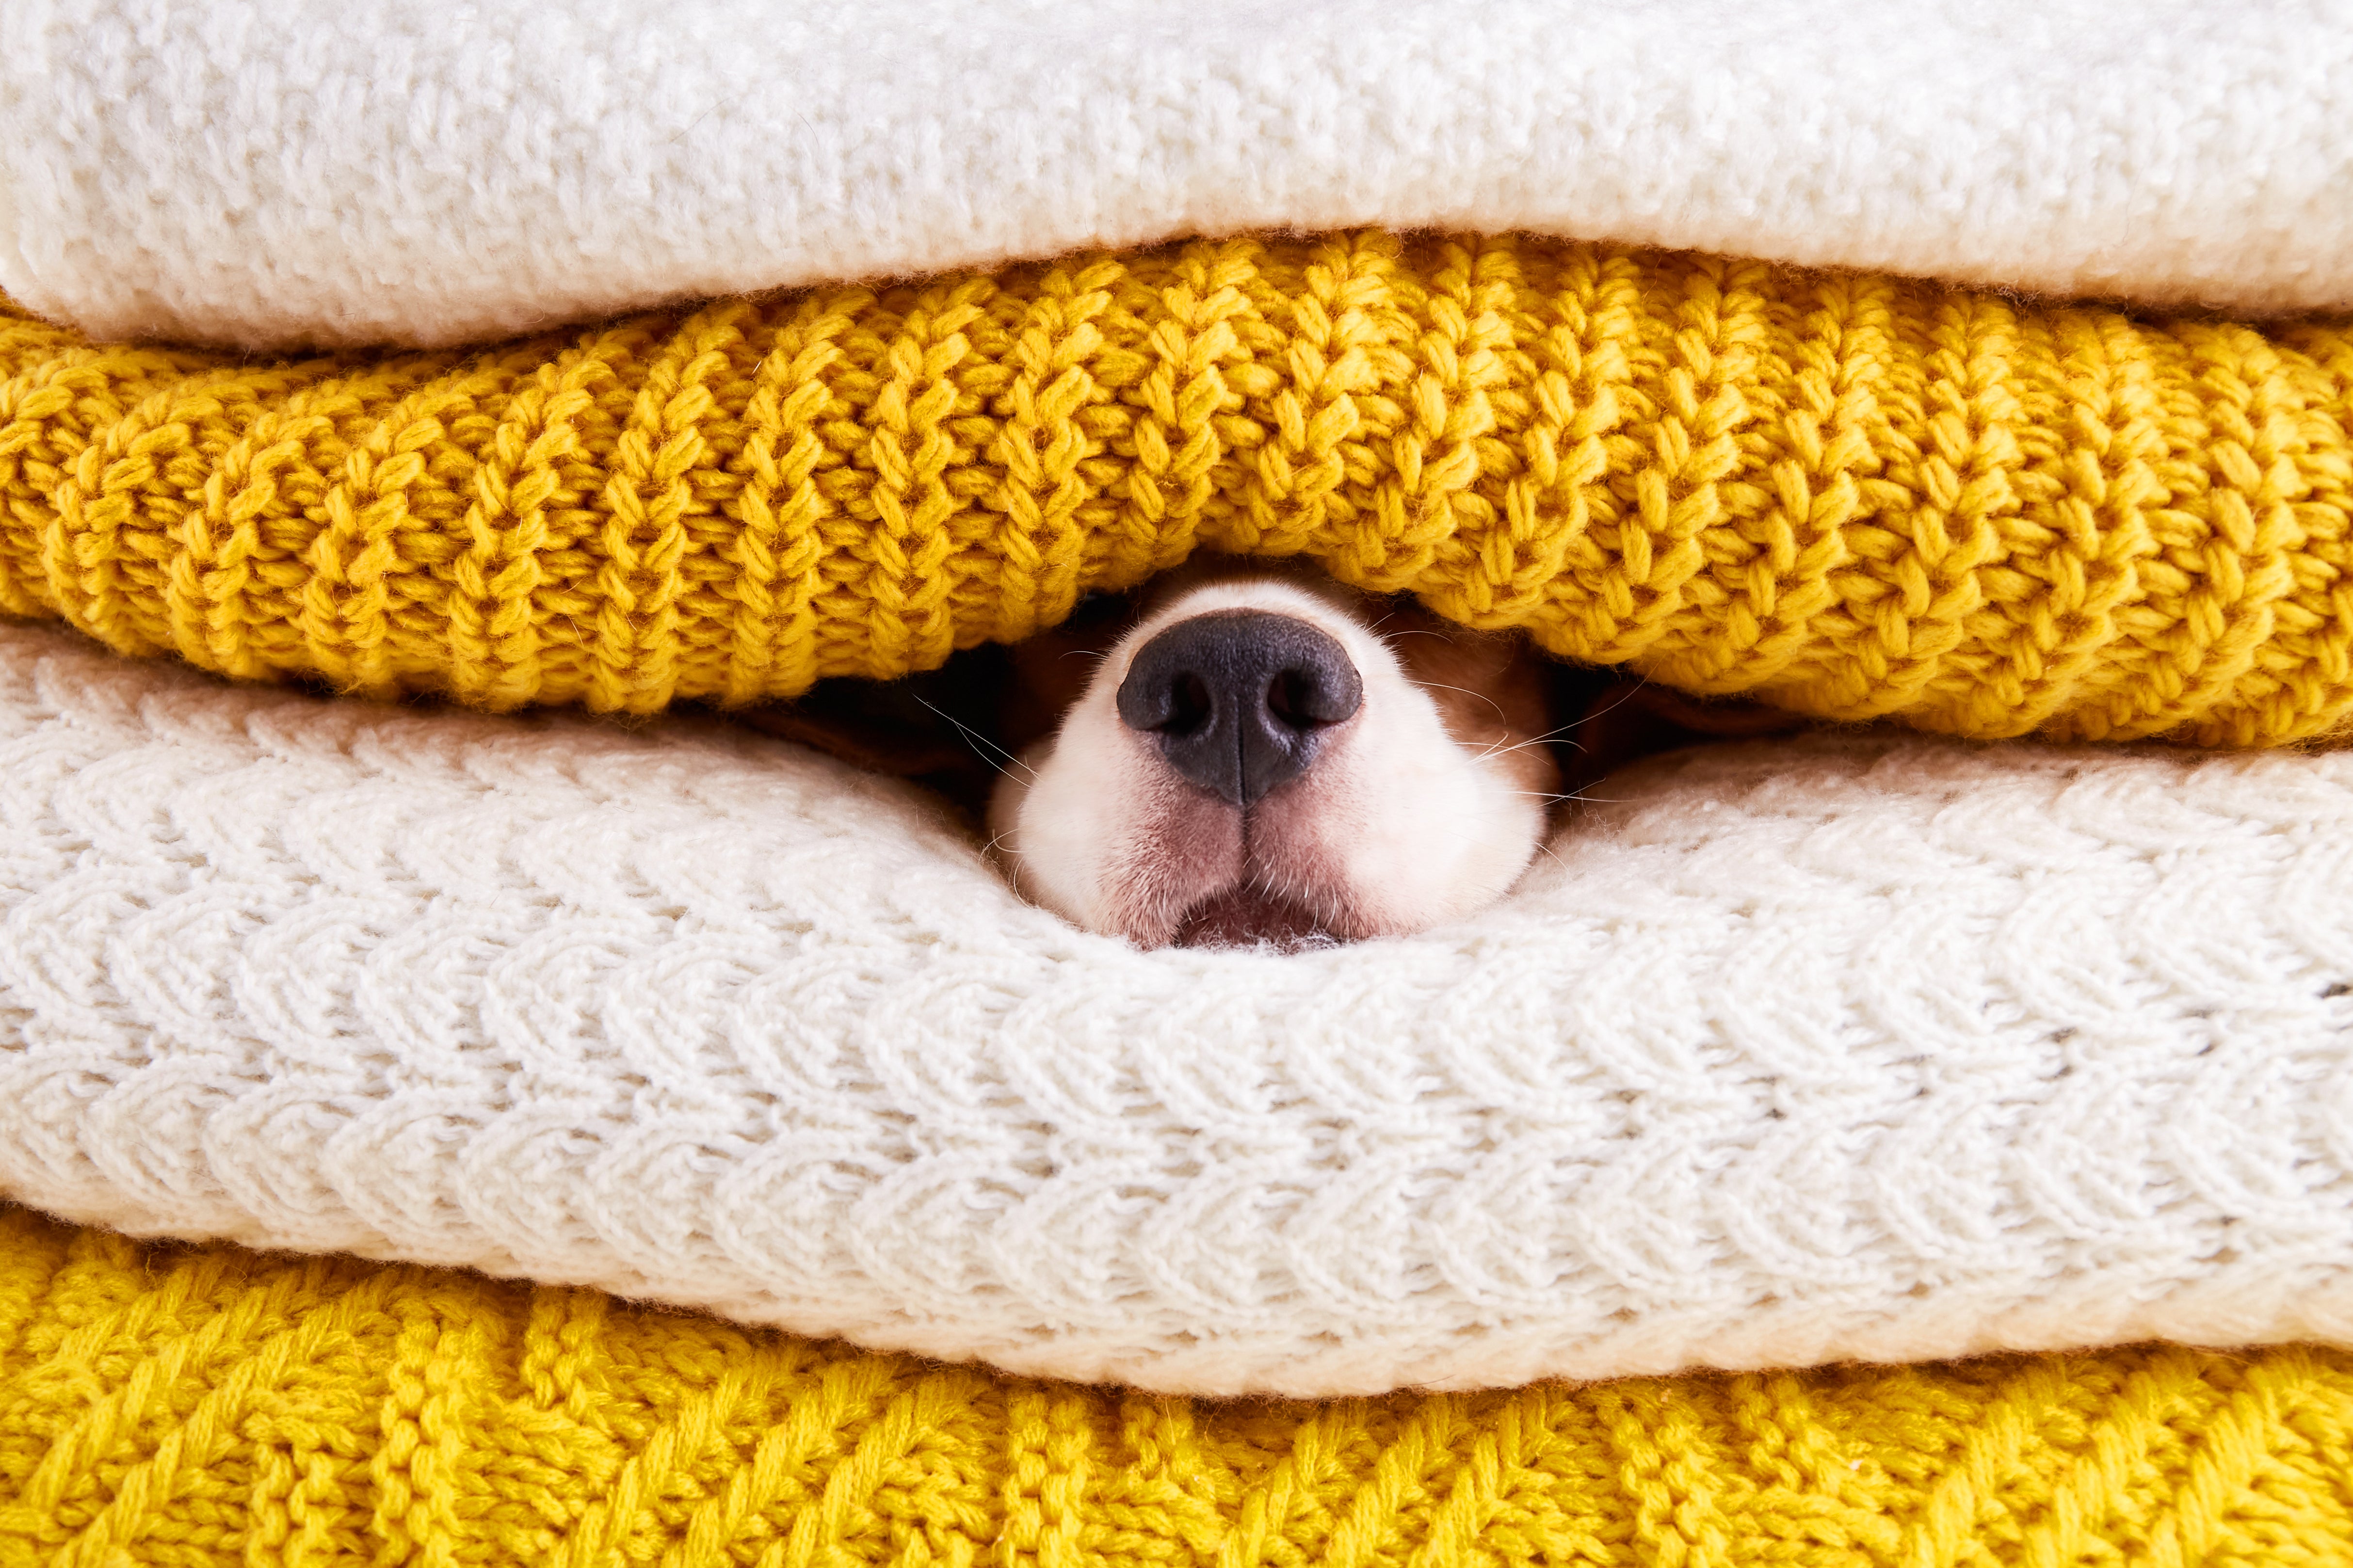 A little dog has only its adorable black and white and brown furred nose poking out between an Orange and white knitted blankets.